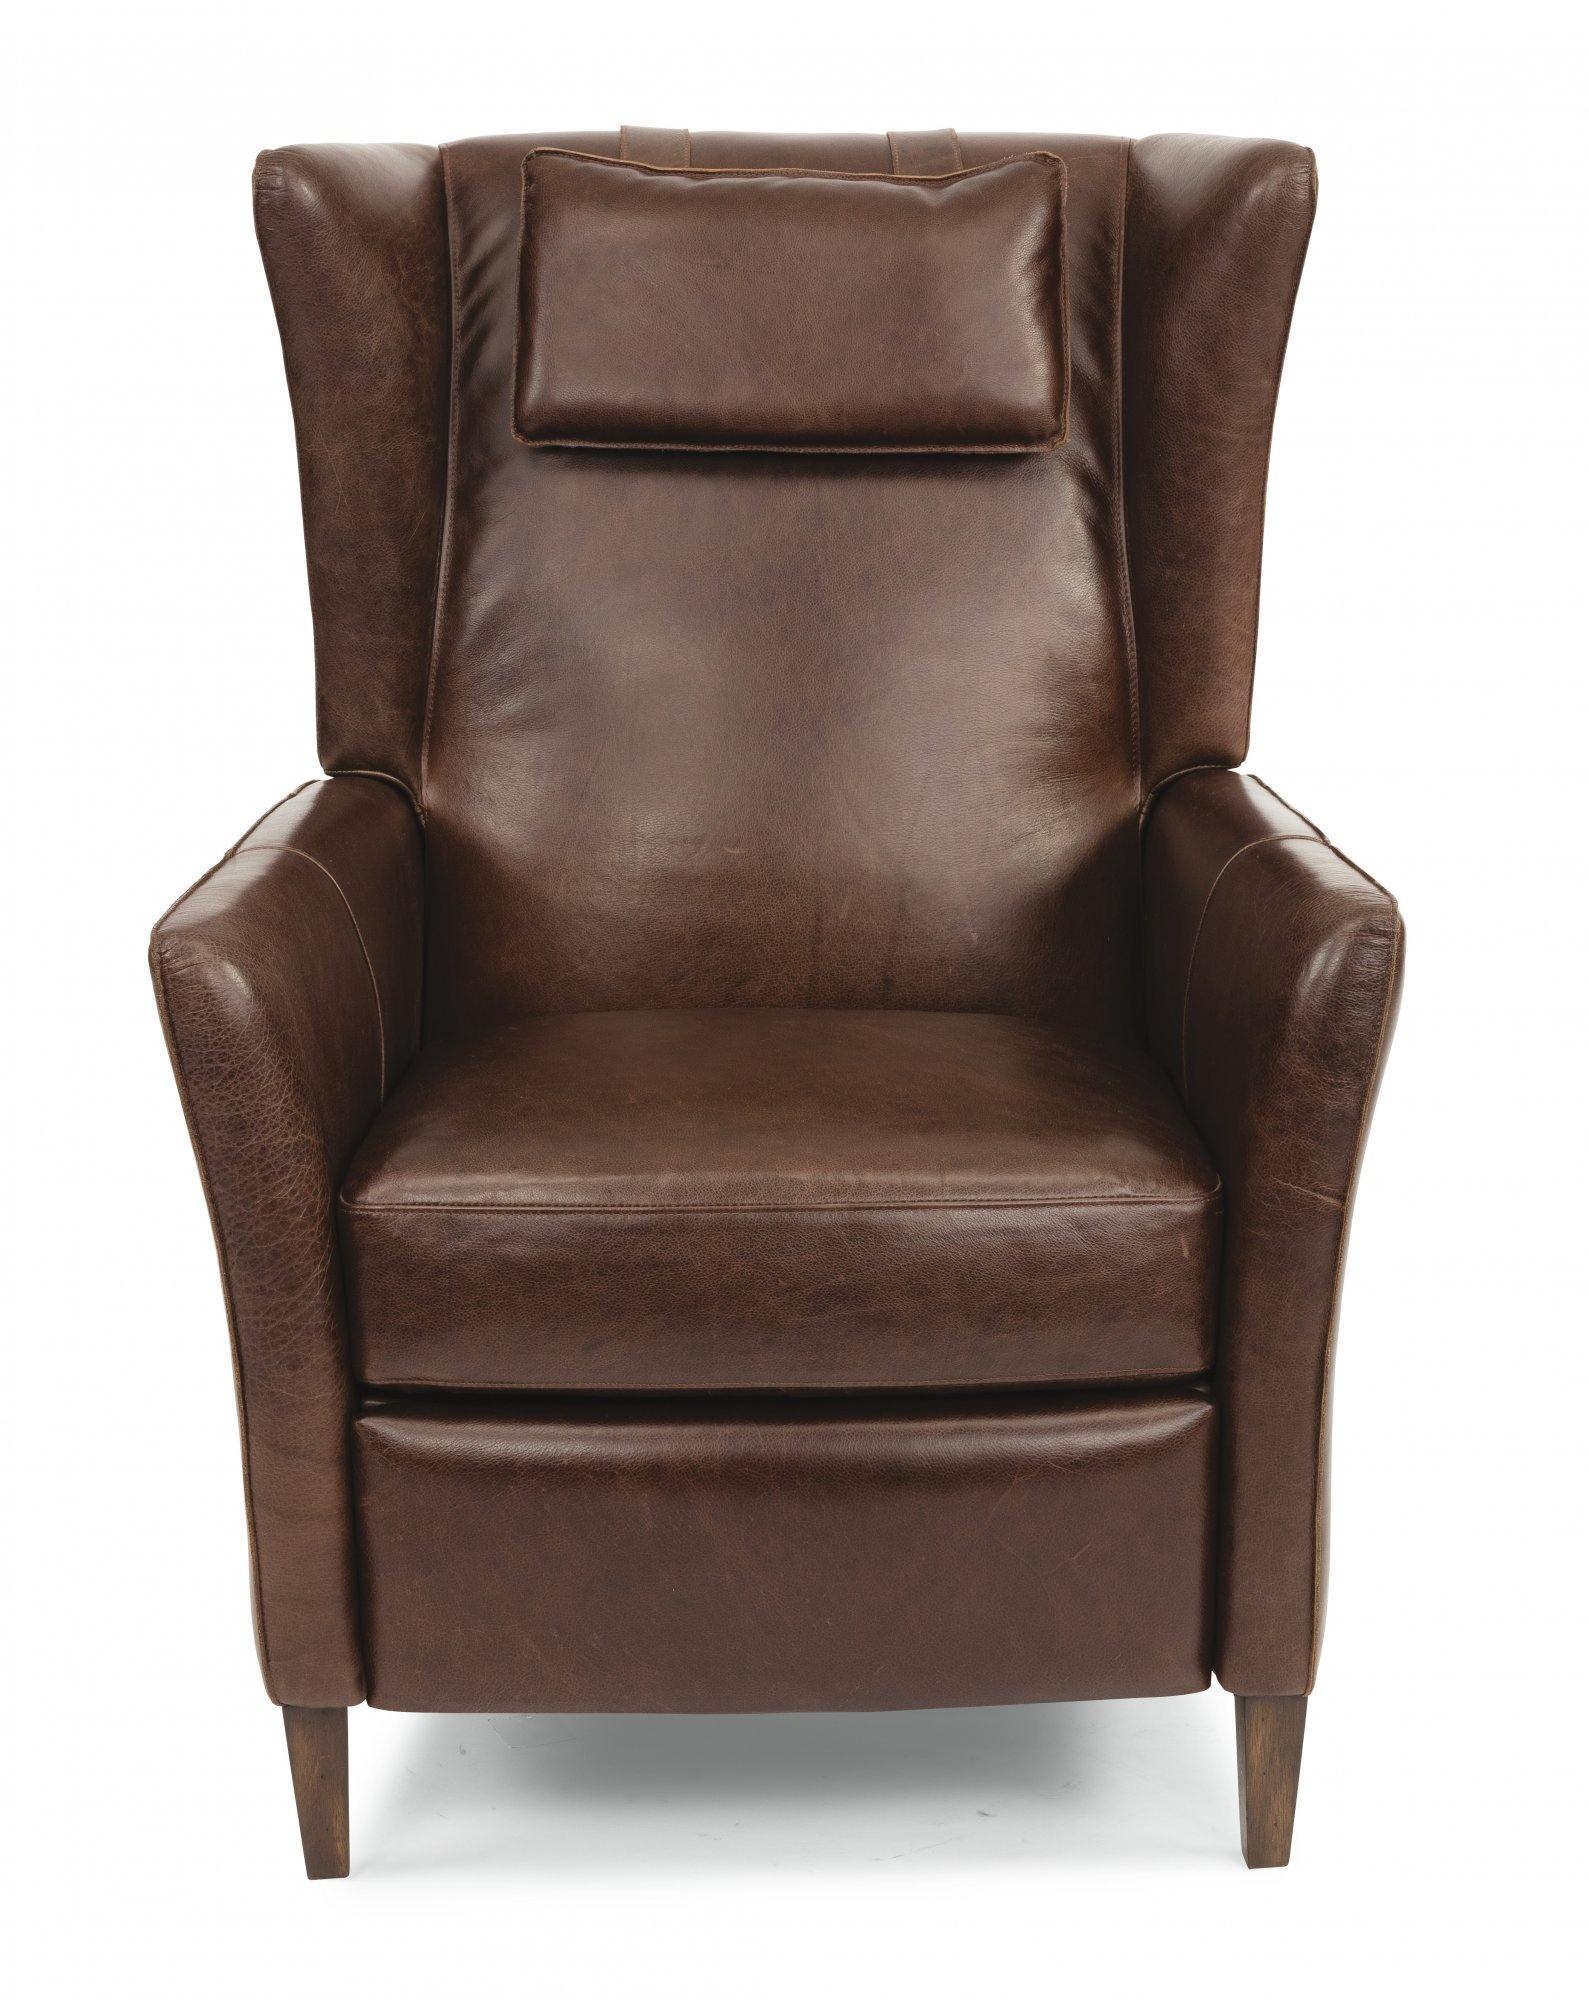 Oswald Leather Recliner - The Tin Roof Furniture